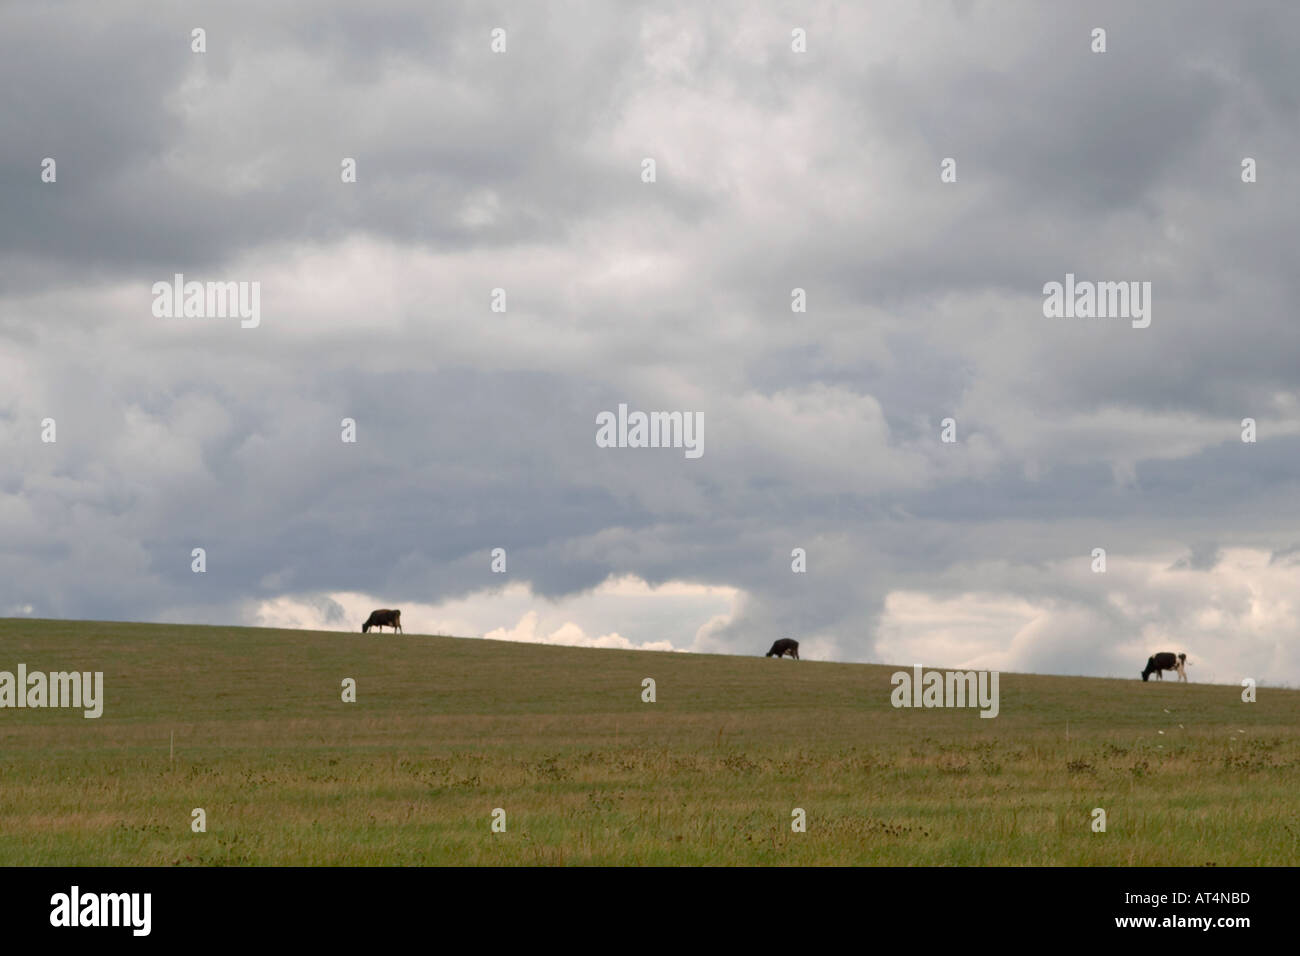 Three cows on top of hill with stormy sky in background Stock Photo